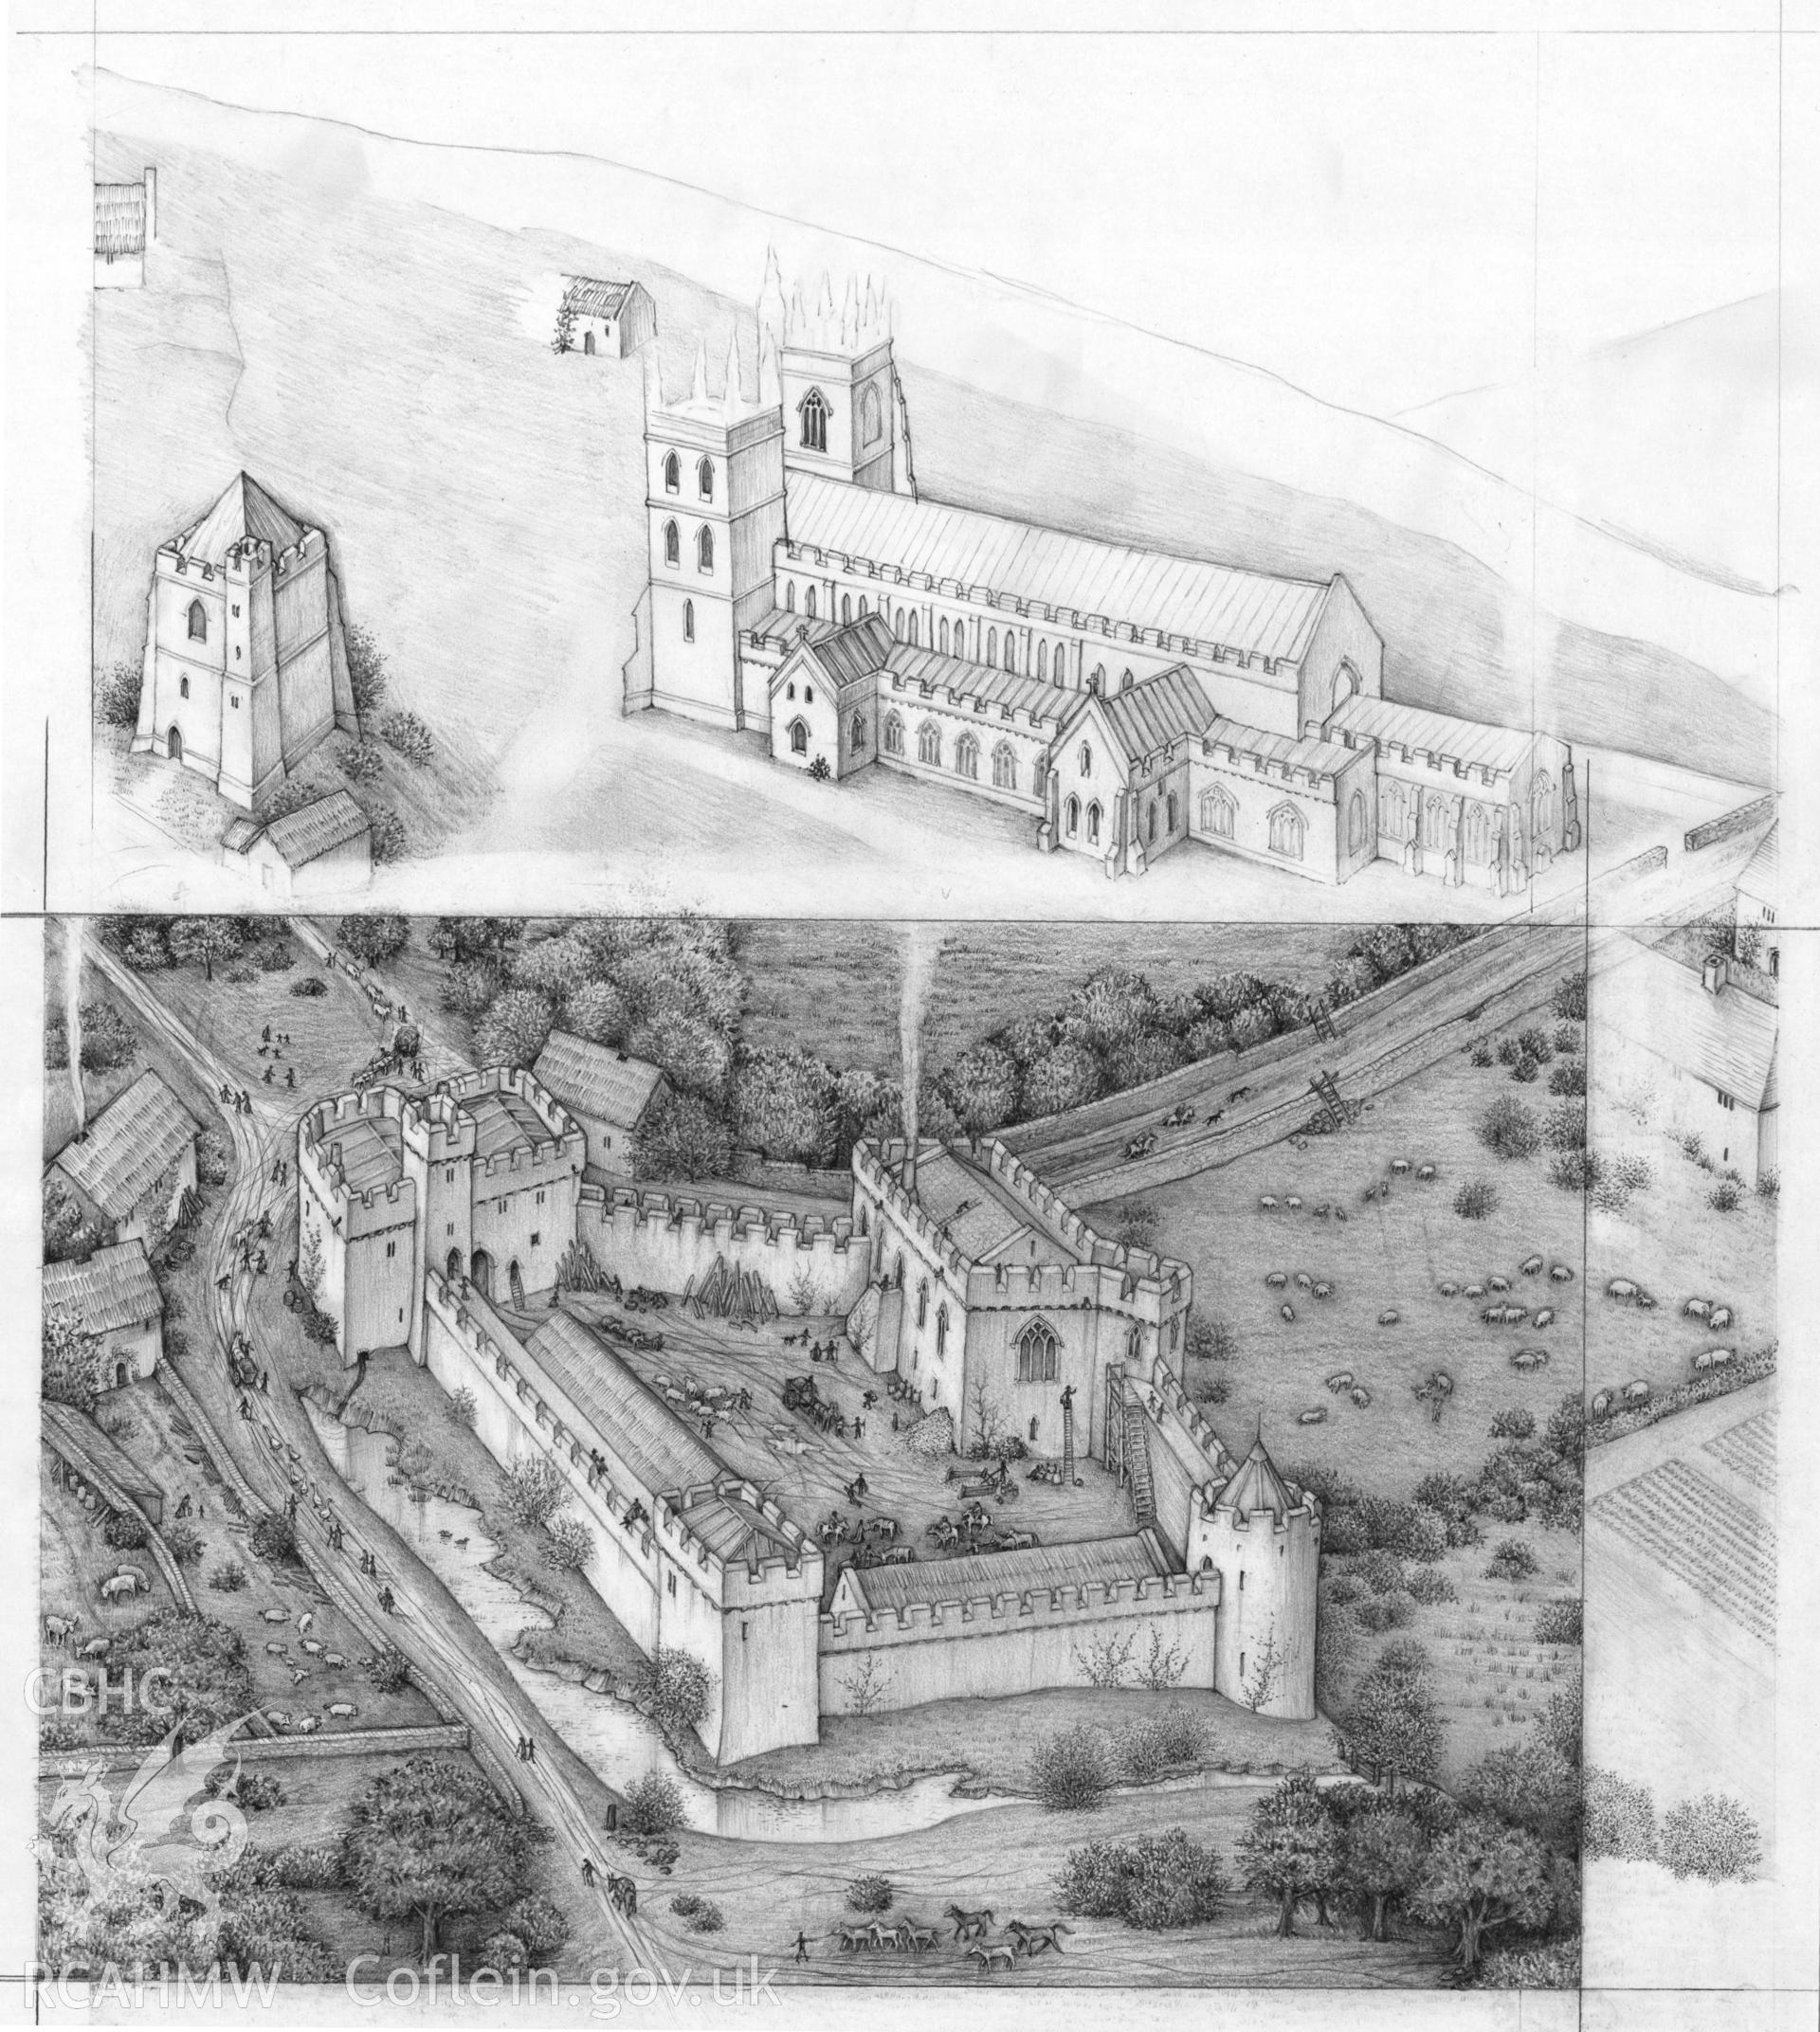 Drawing relating to LM 2: Bishop's Castle, Llandaff: Figure 25 in the Inventory.